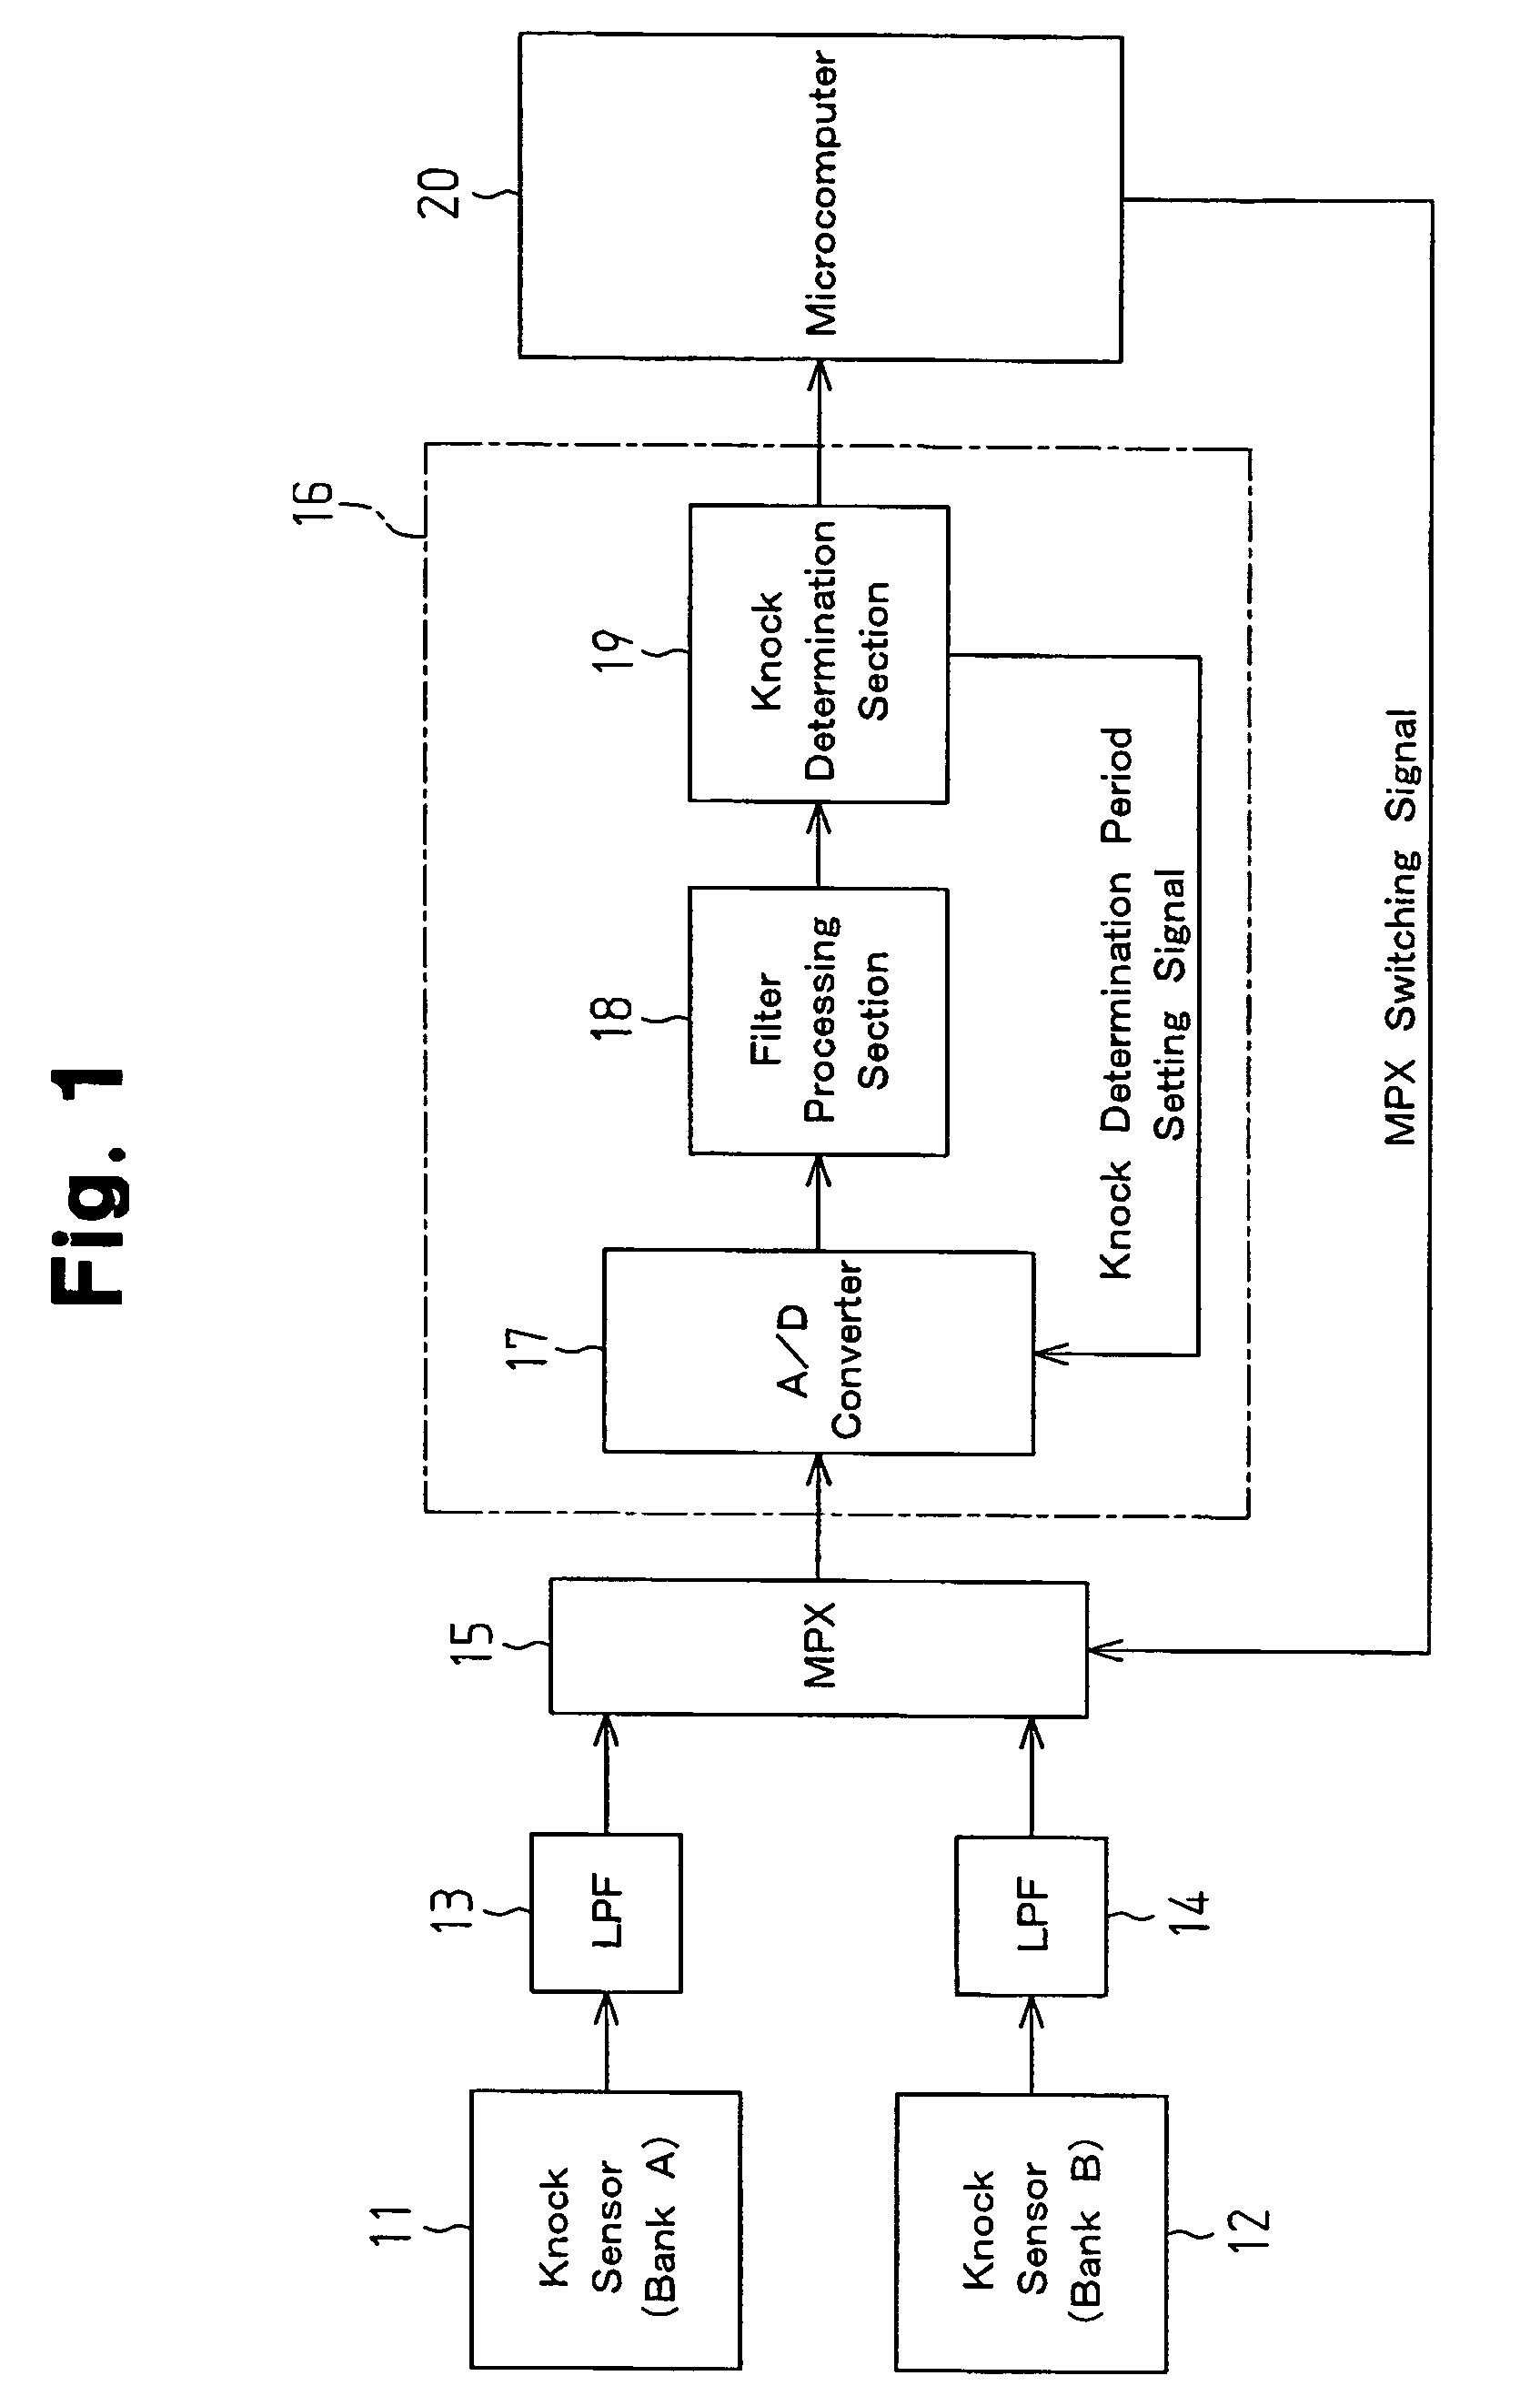 Knock detecting apparatus and method for internal combustion engine